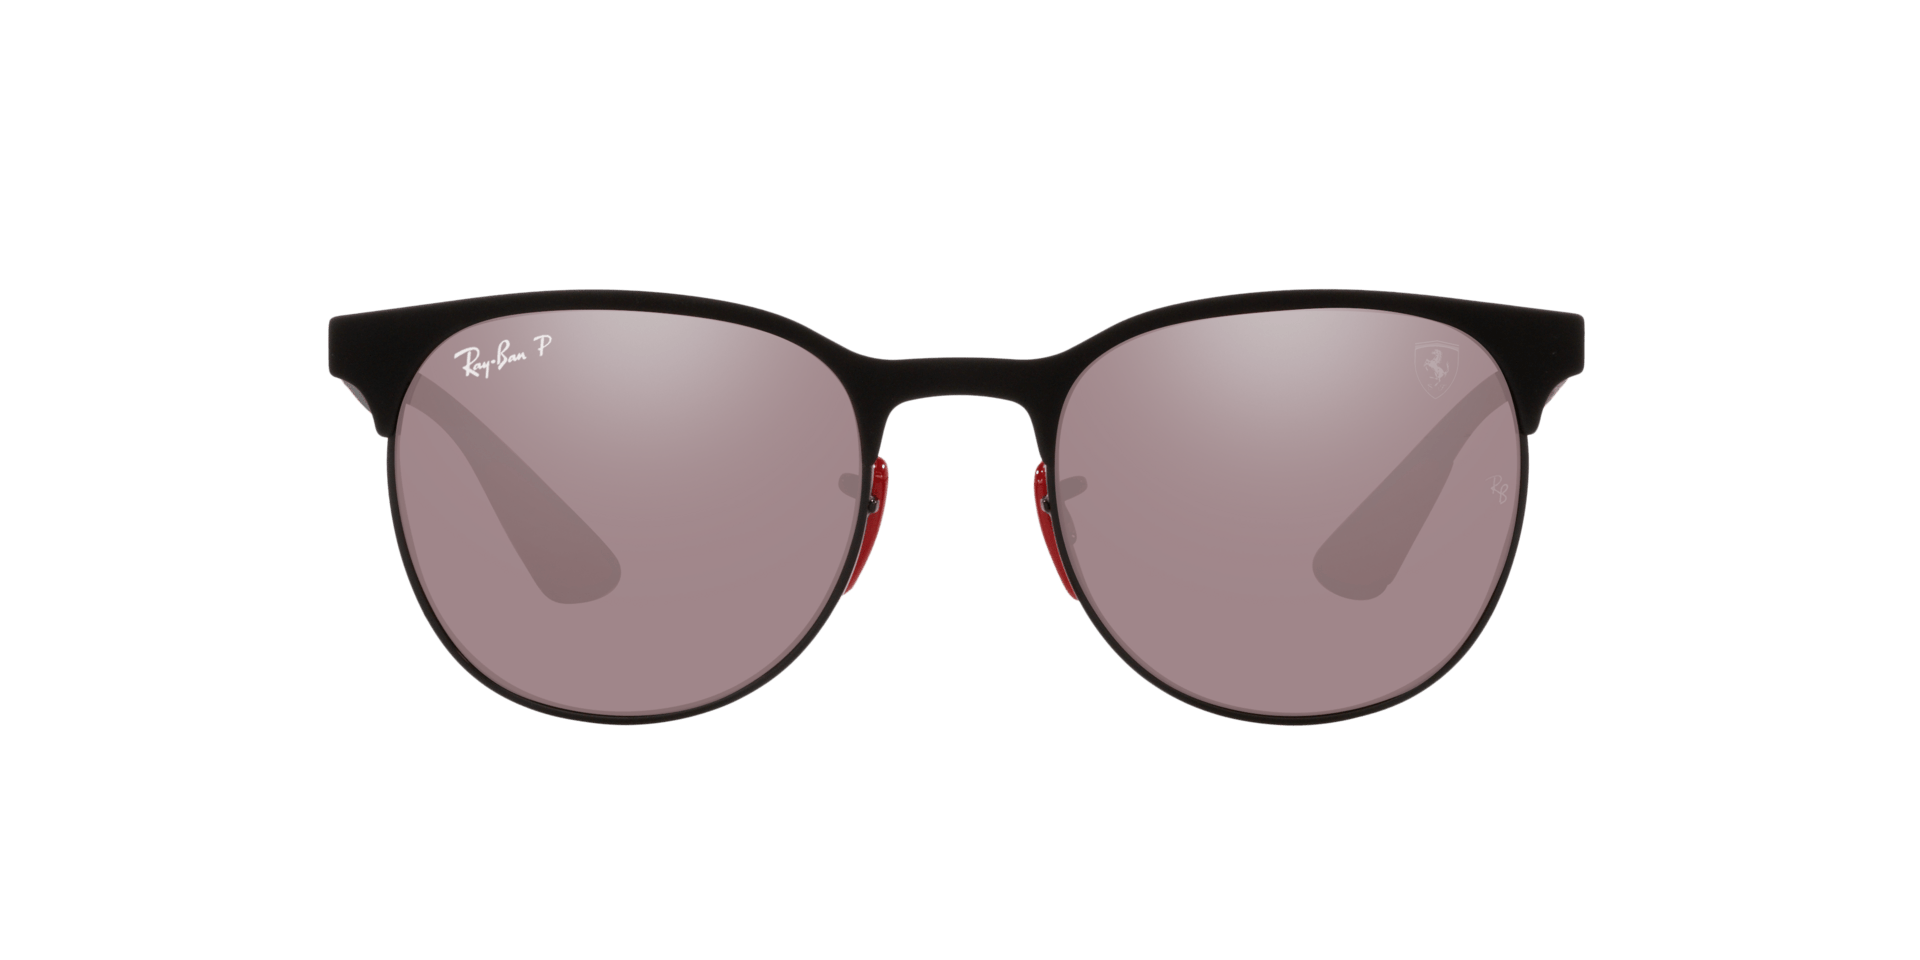 Sunglass Hut - Iconic outside. Bio-based inside. Introducing the Ray-Ban  Bio-Acetate Wayfarer collection – frames that are as legendary as the  original. RB2140 | Facebook